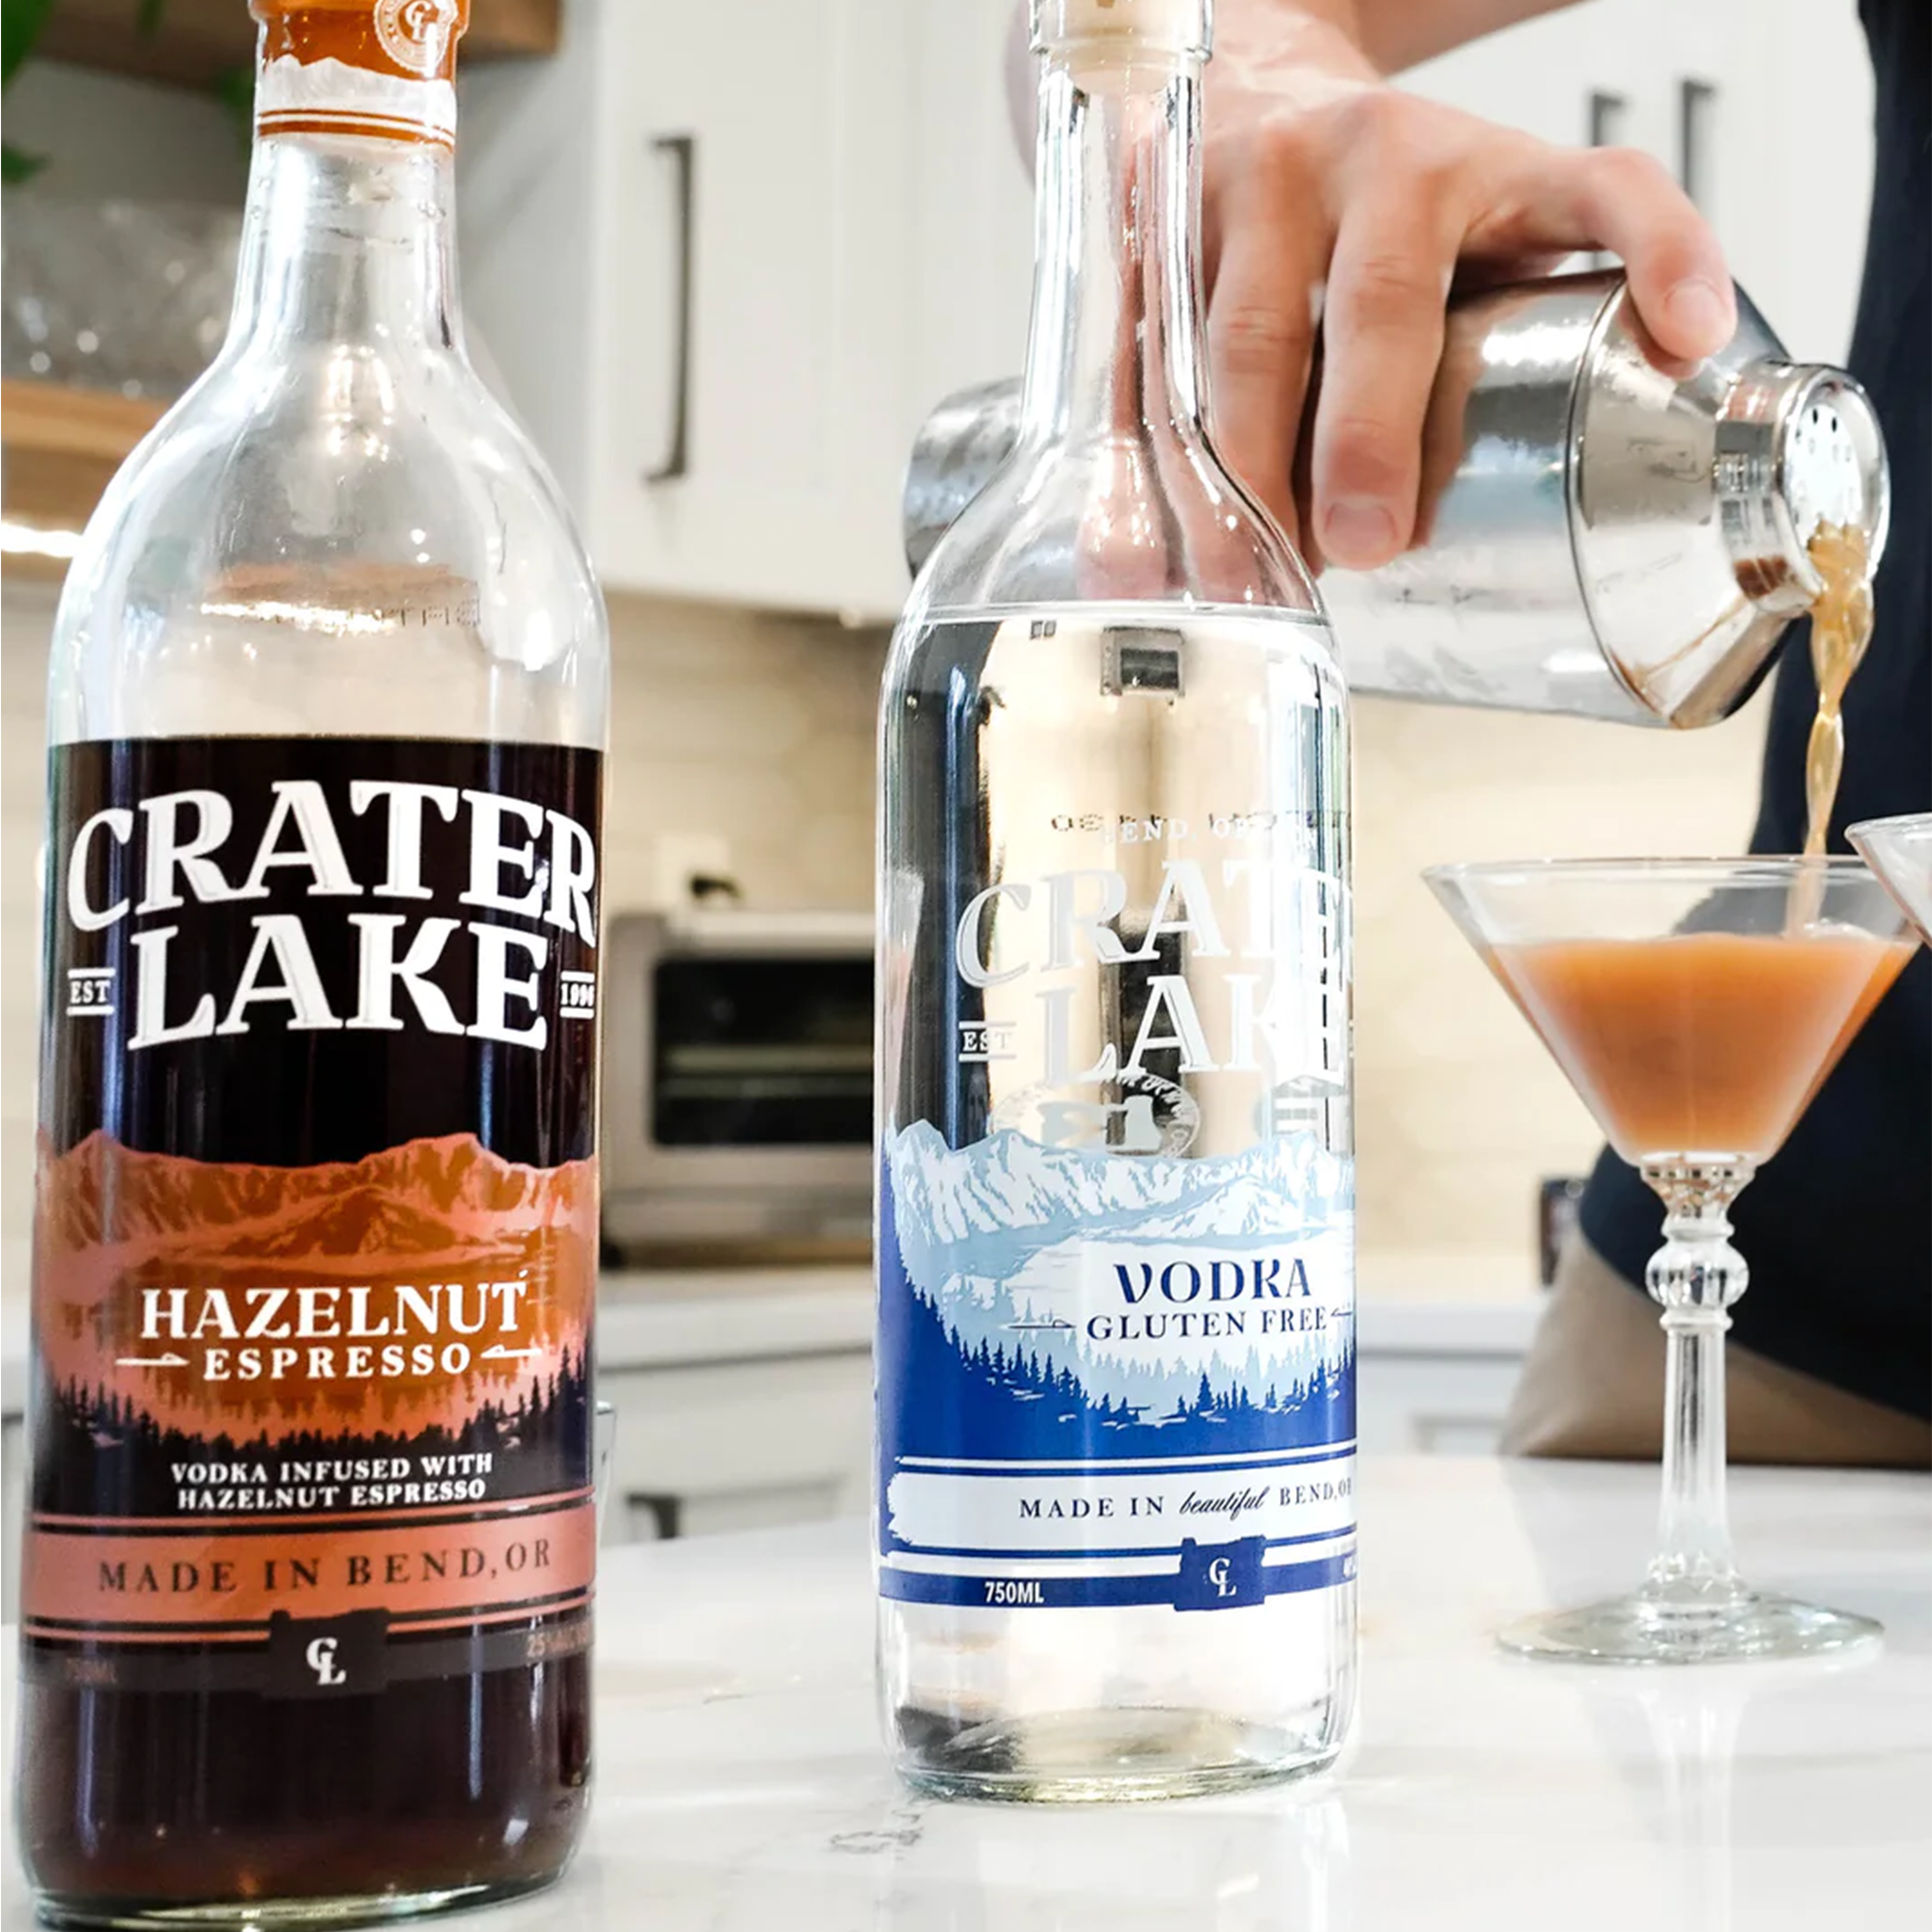 Crater Lake North West Berry Vodka